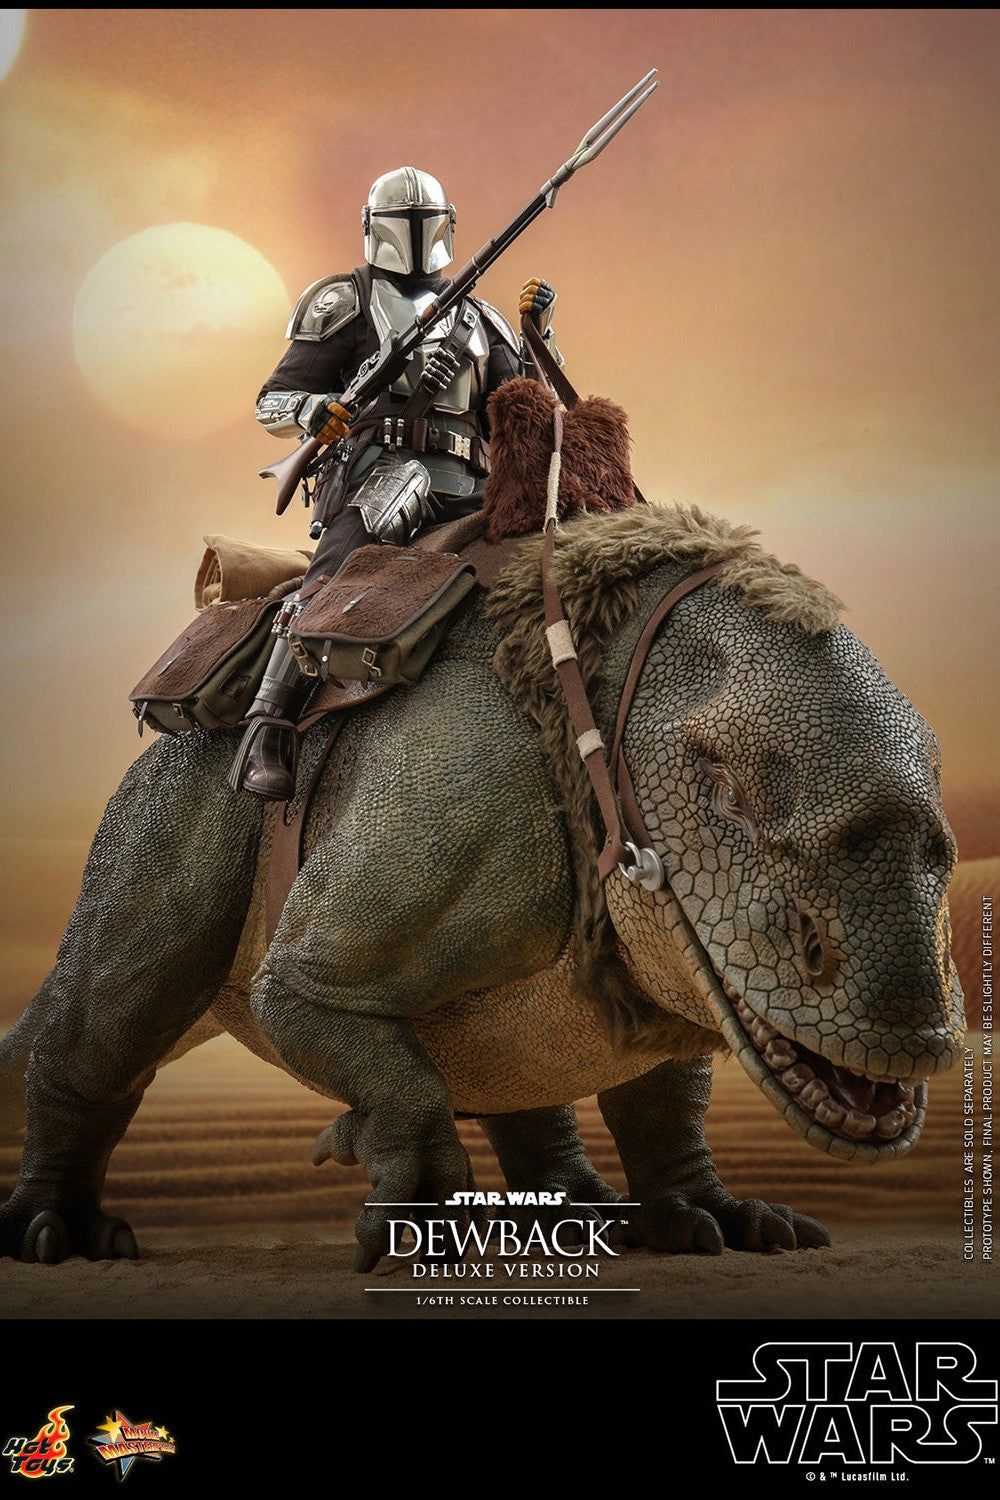 Dewback Deluxe: Star Wars: A New Hope: Mandalorian Not Included